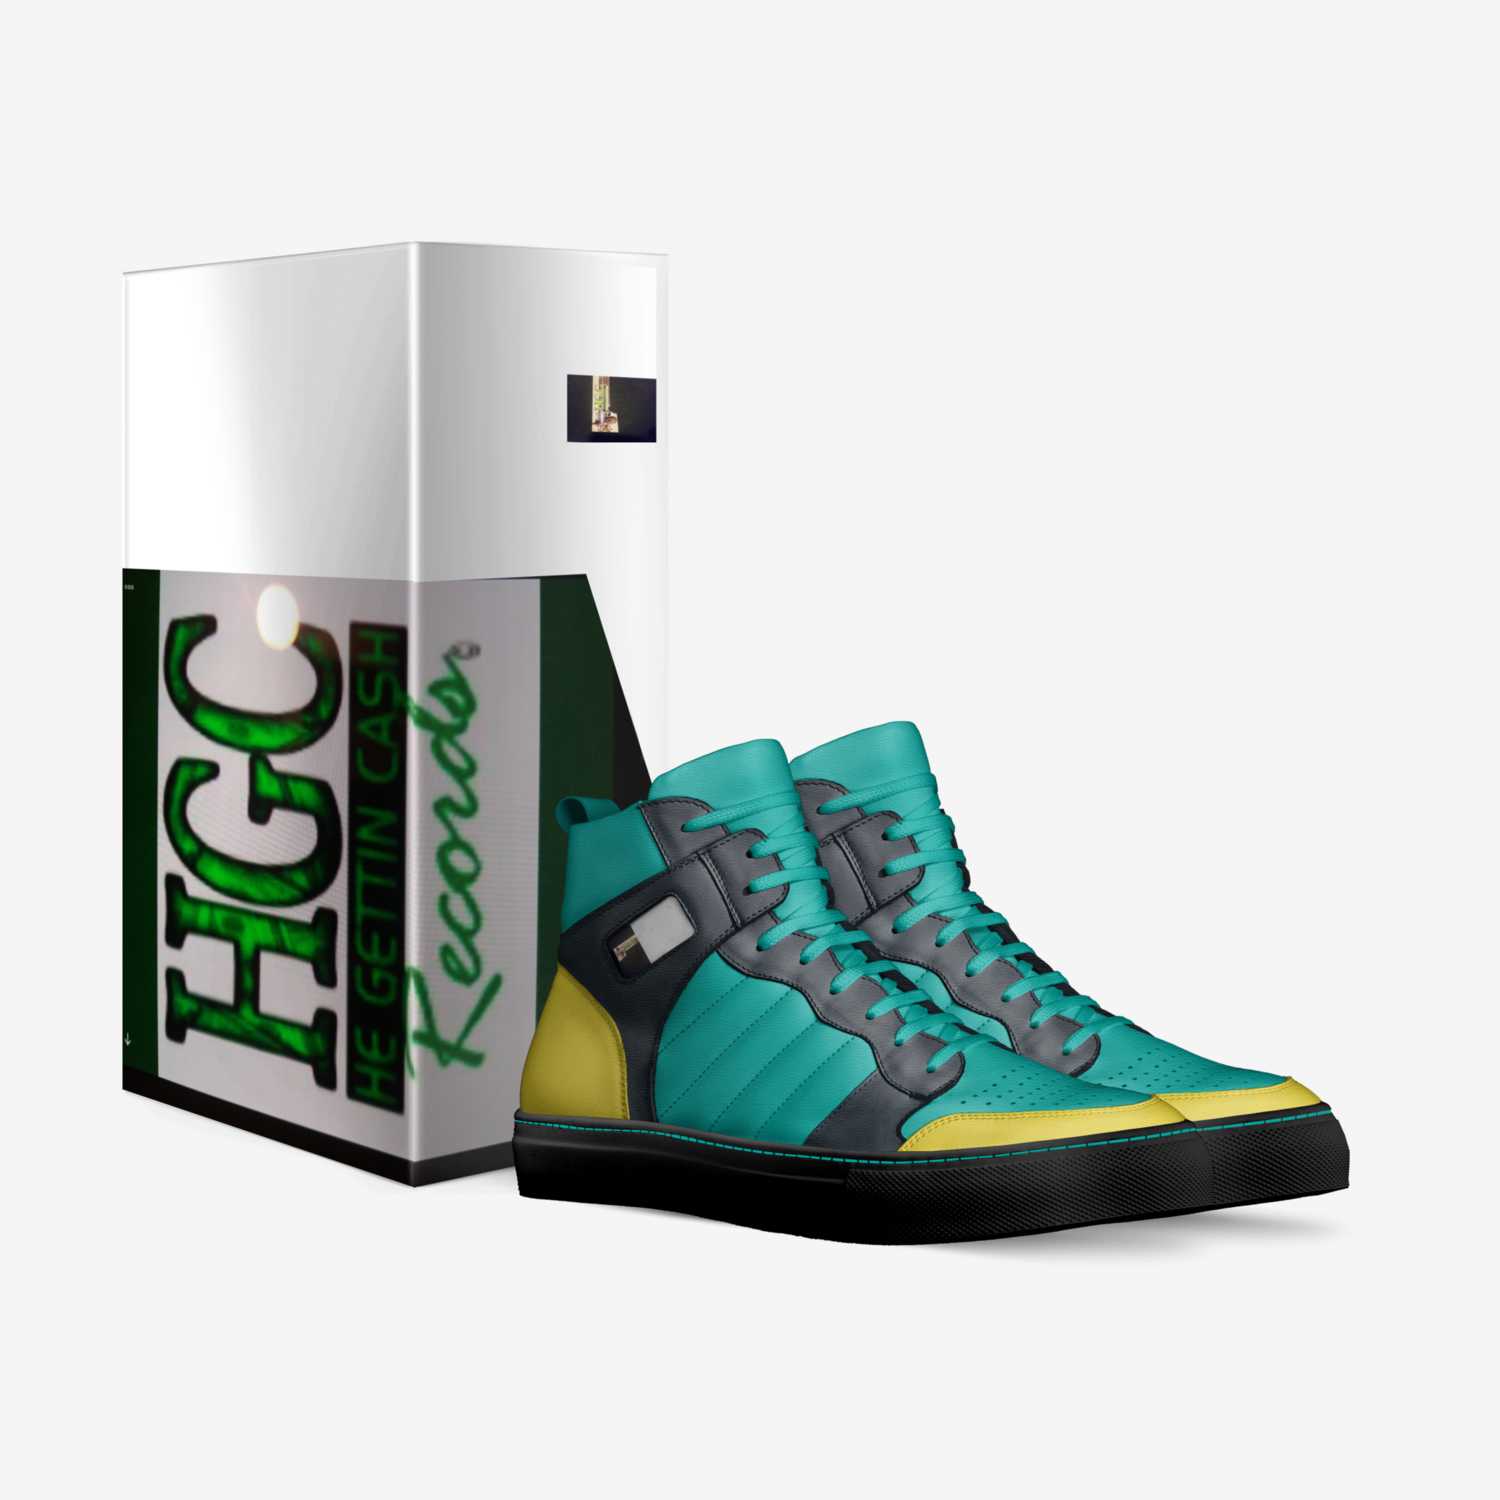 HGC Rebels  custom made in Italy shoes by Ermus Revels | Box view